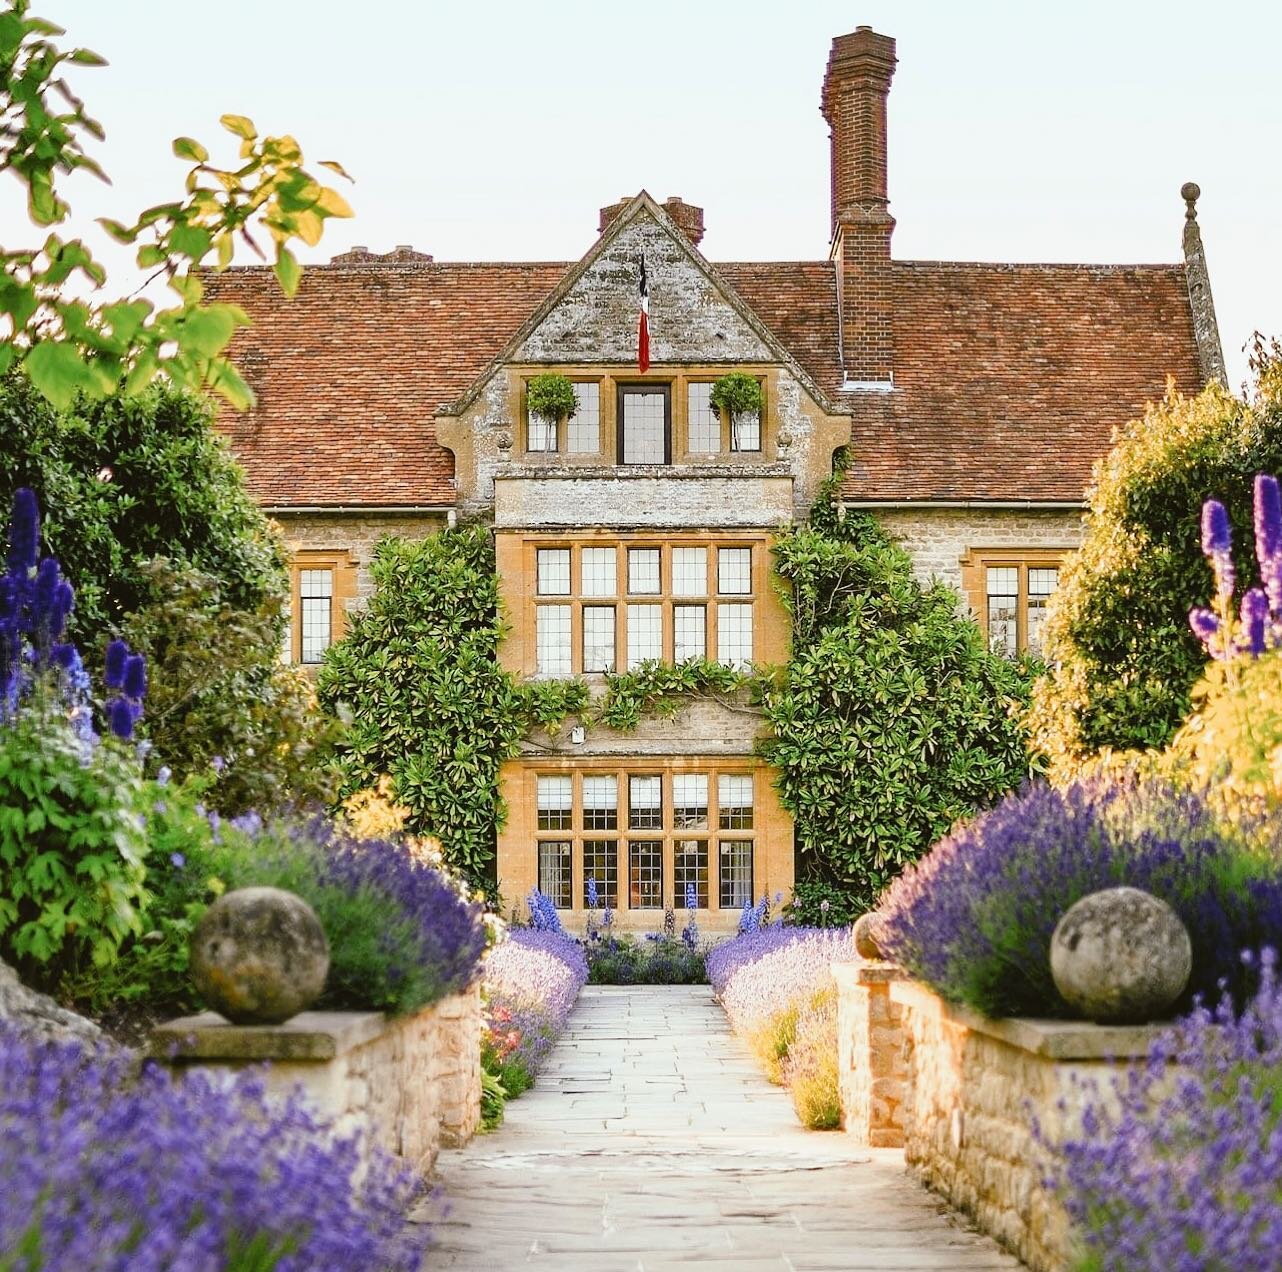 Belmond Le Manoir aux Quat'Saisons, Oxfordshire, UK 💚 Garden Gastronomy is just the start of this greenest of stories from Raymond Blanc&rsquo;s hotel, restaurant and cookery school. The poster establishment for the new #MichelinGreenStar accolades: